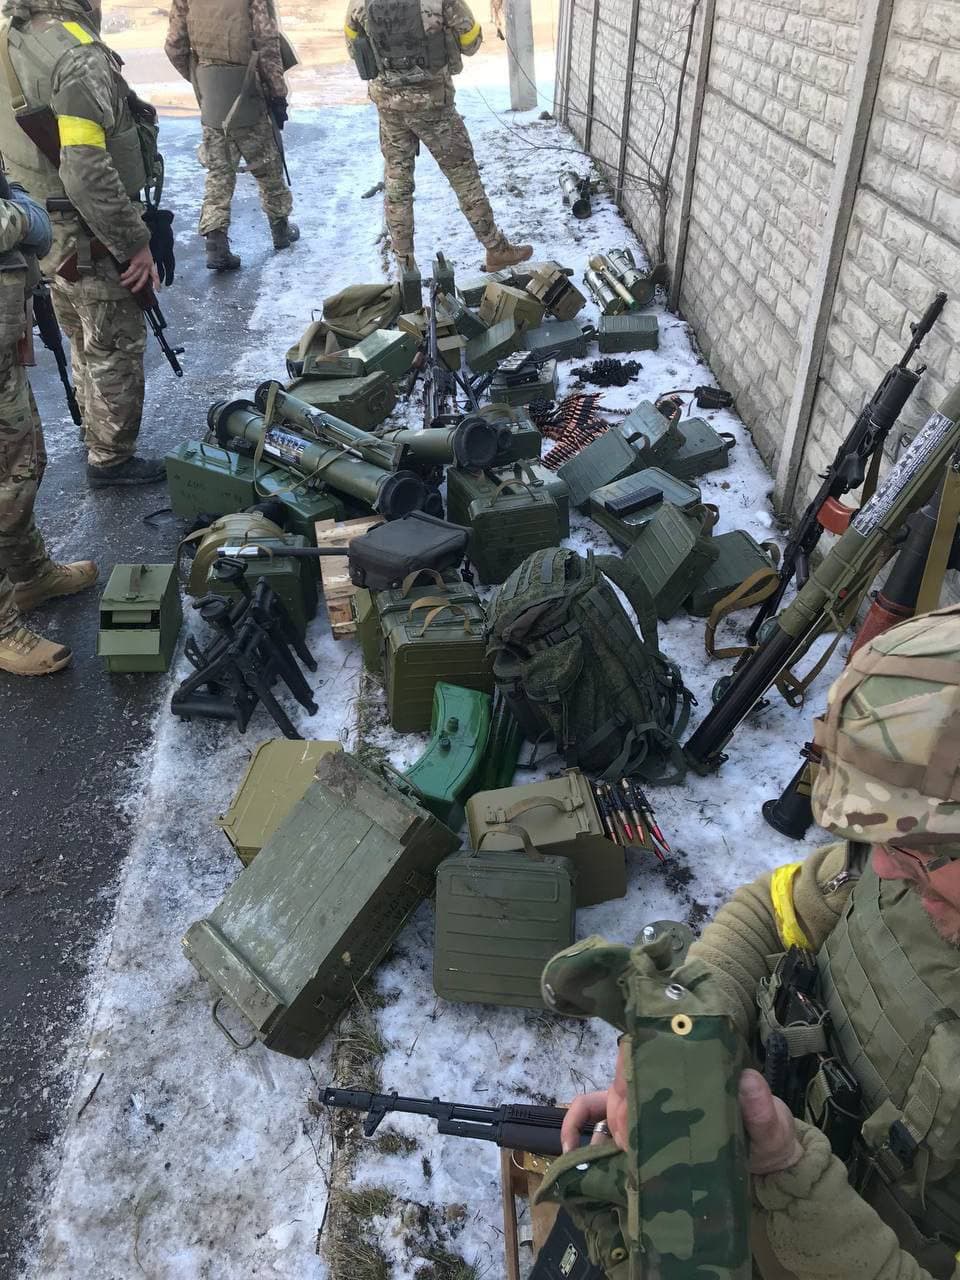 fascinating photos  - Ukrainian forces after destroying and looting Russian SF vehicles that entered Kharkiv